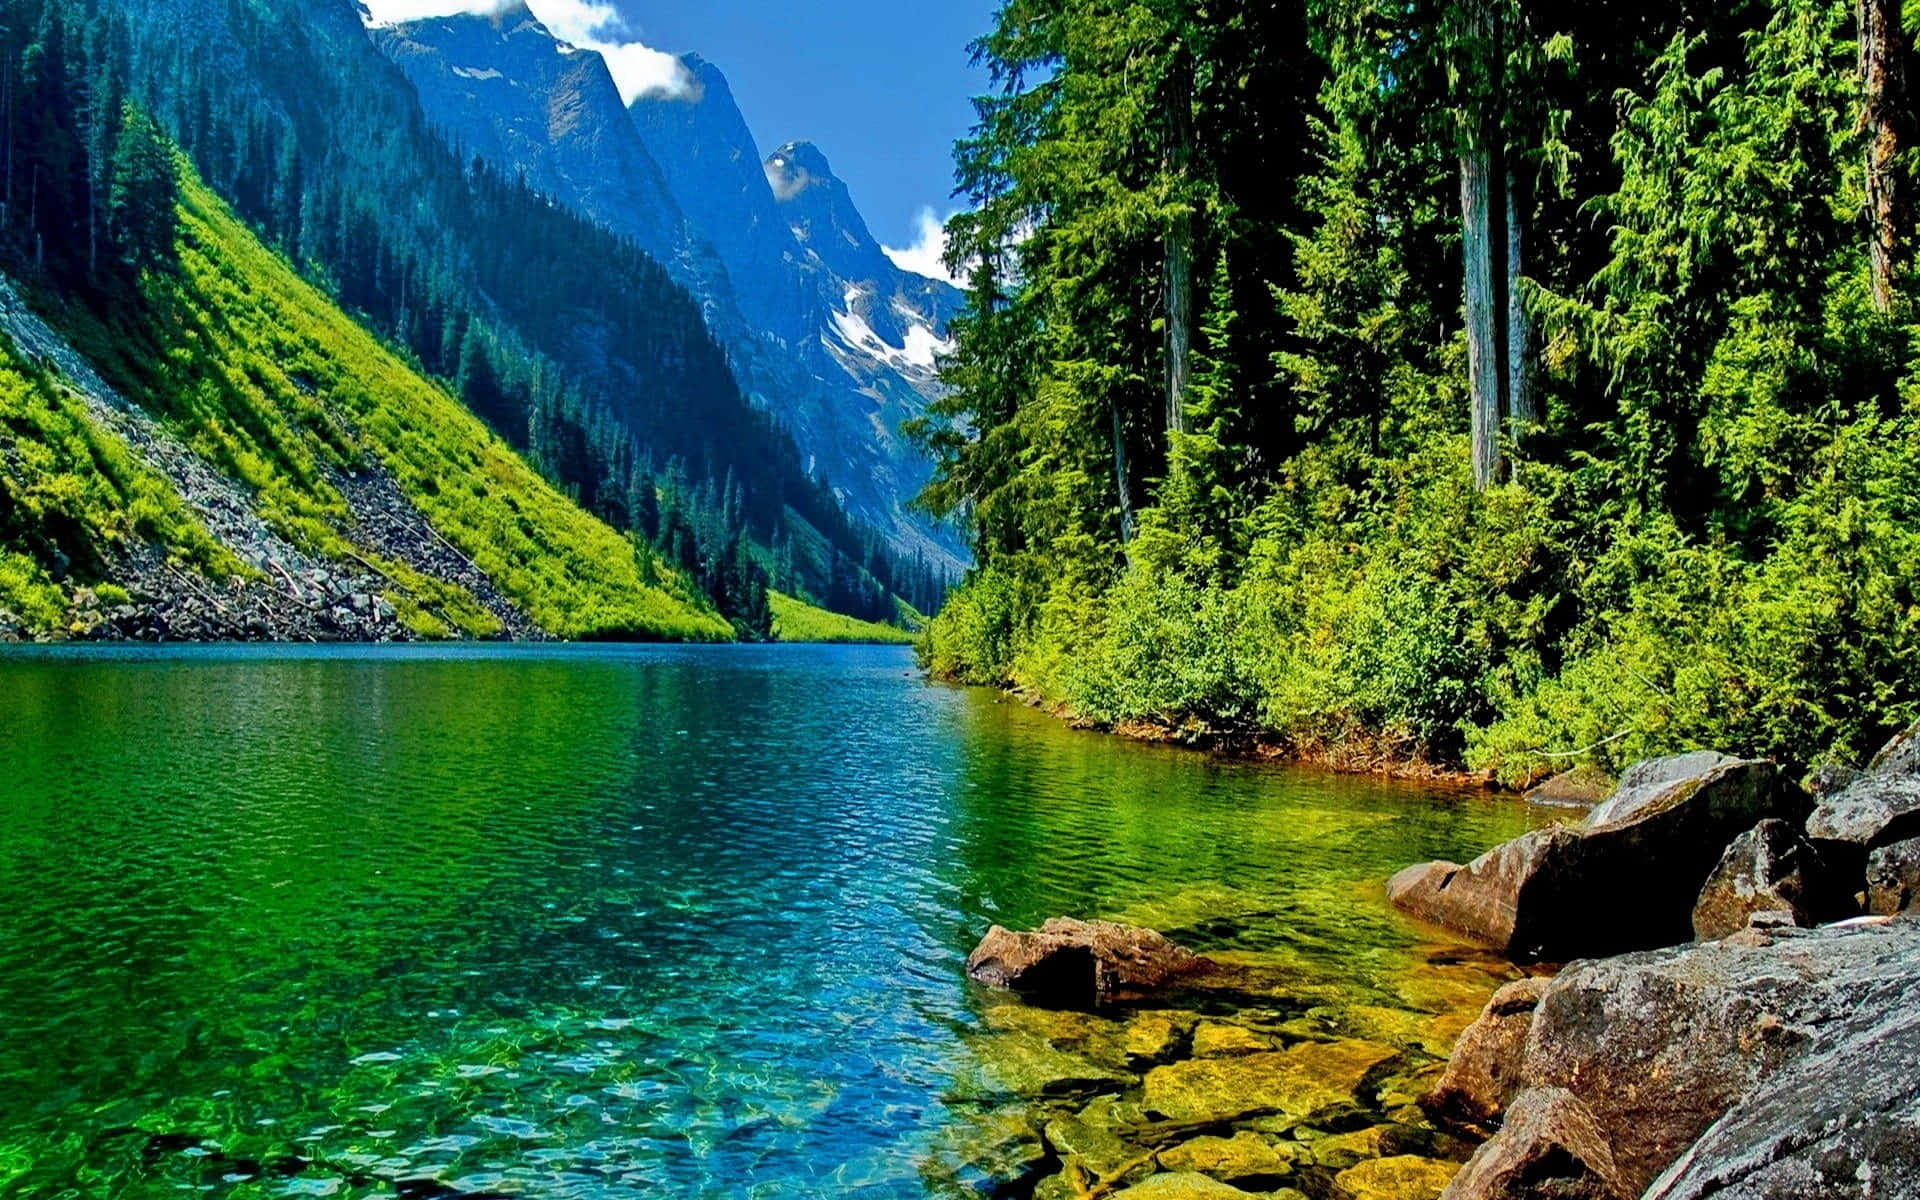 a lake surrounded by mountains and trees